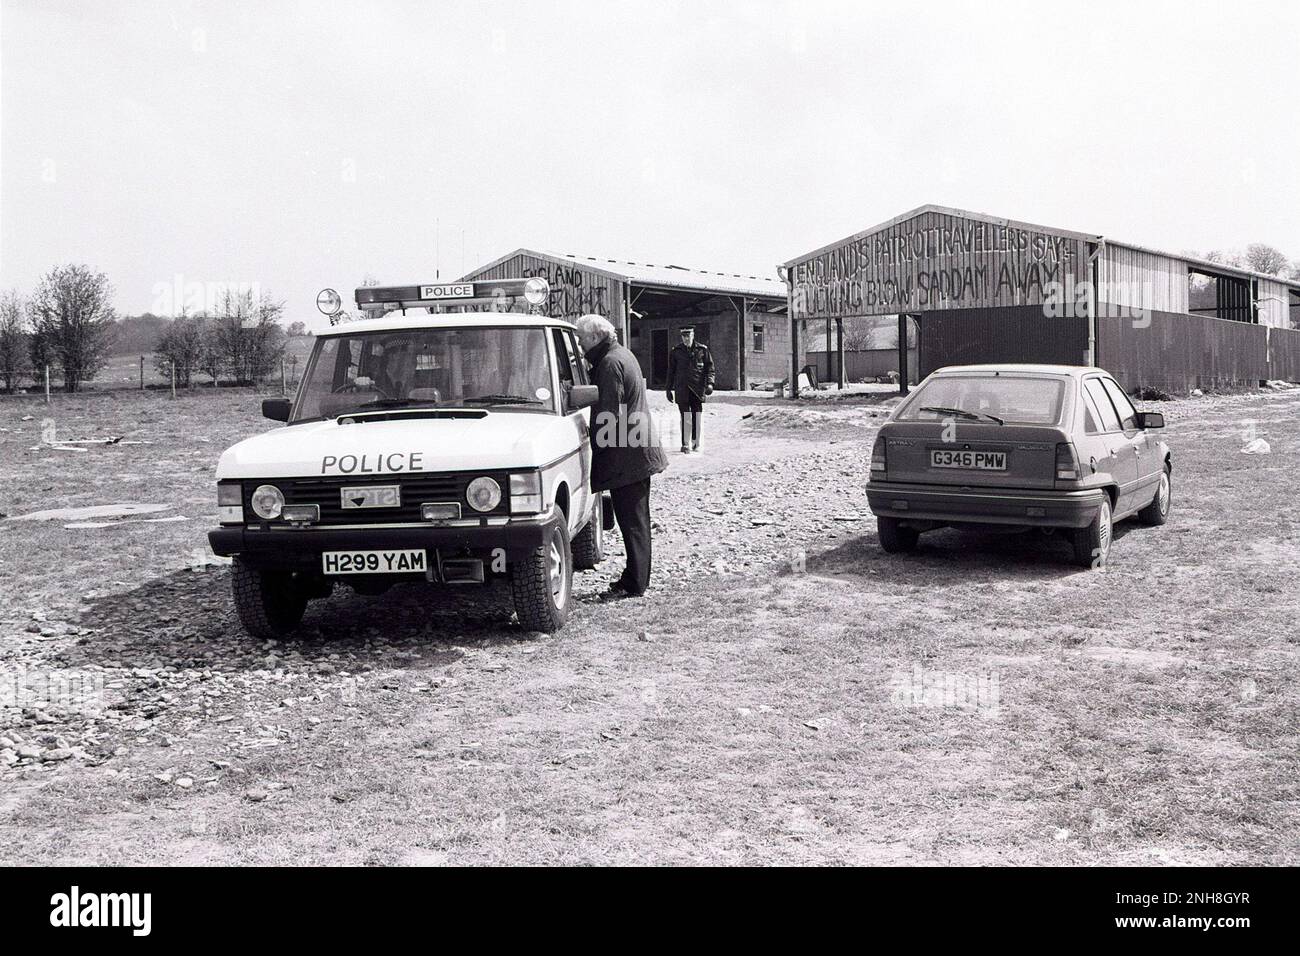 A Police Range Rover on duty at the scene of a rural 90s rave in Wiltshire UK. March 1991. Stock Photo